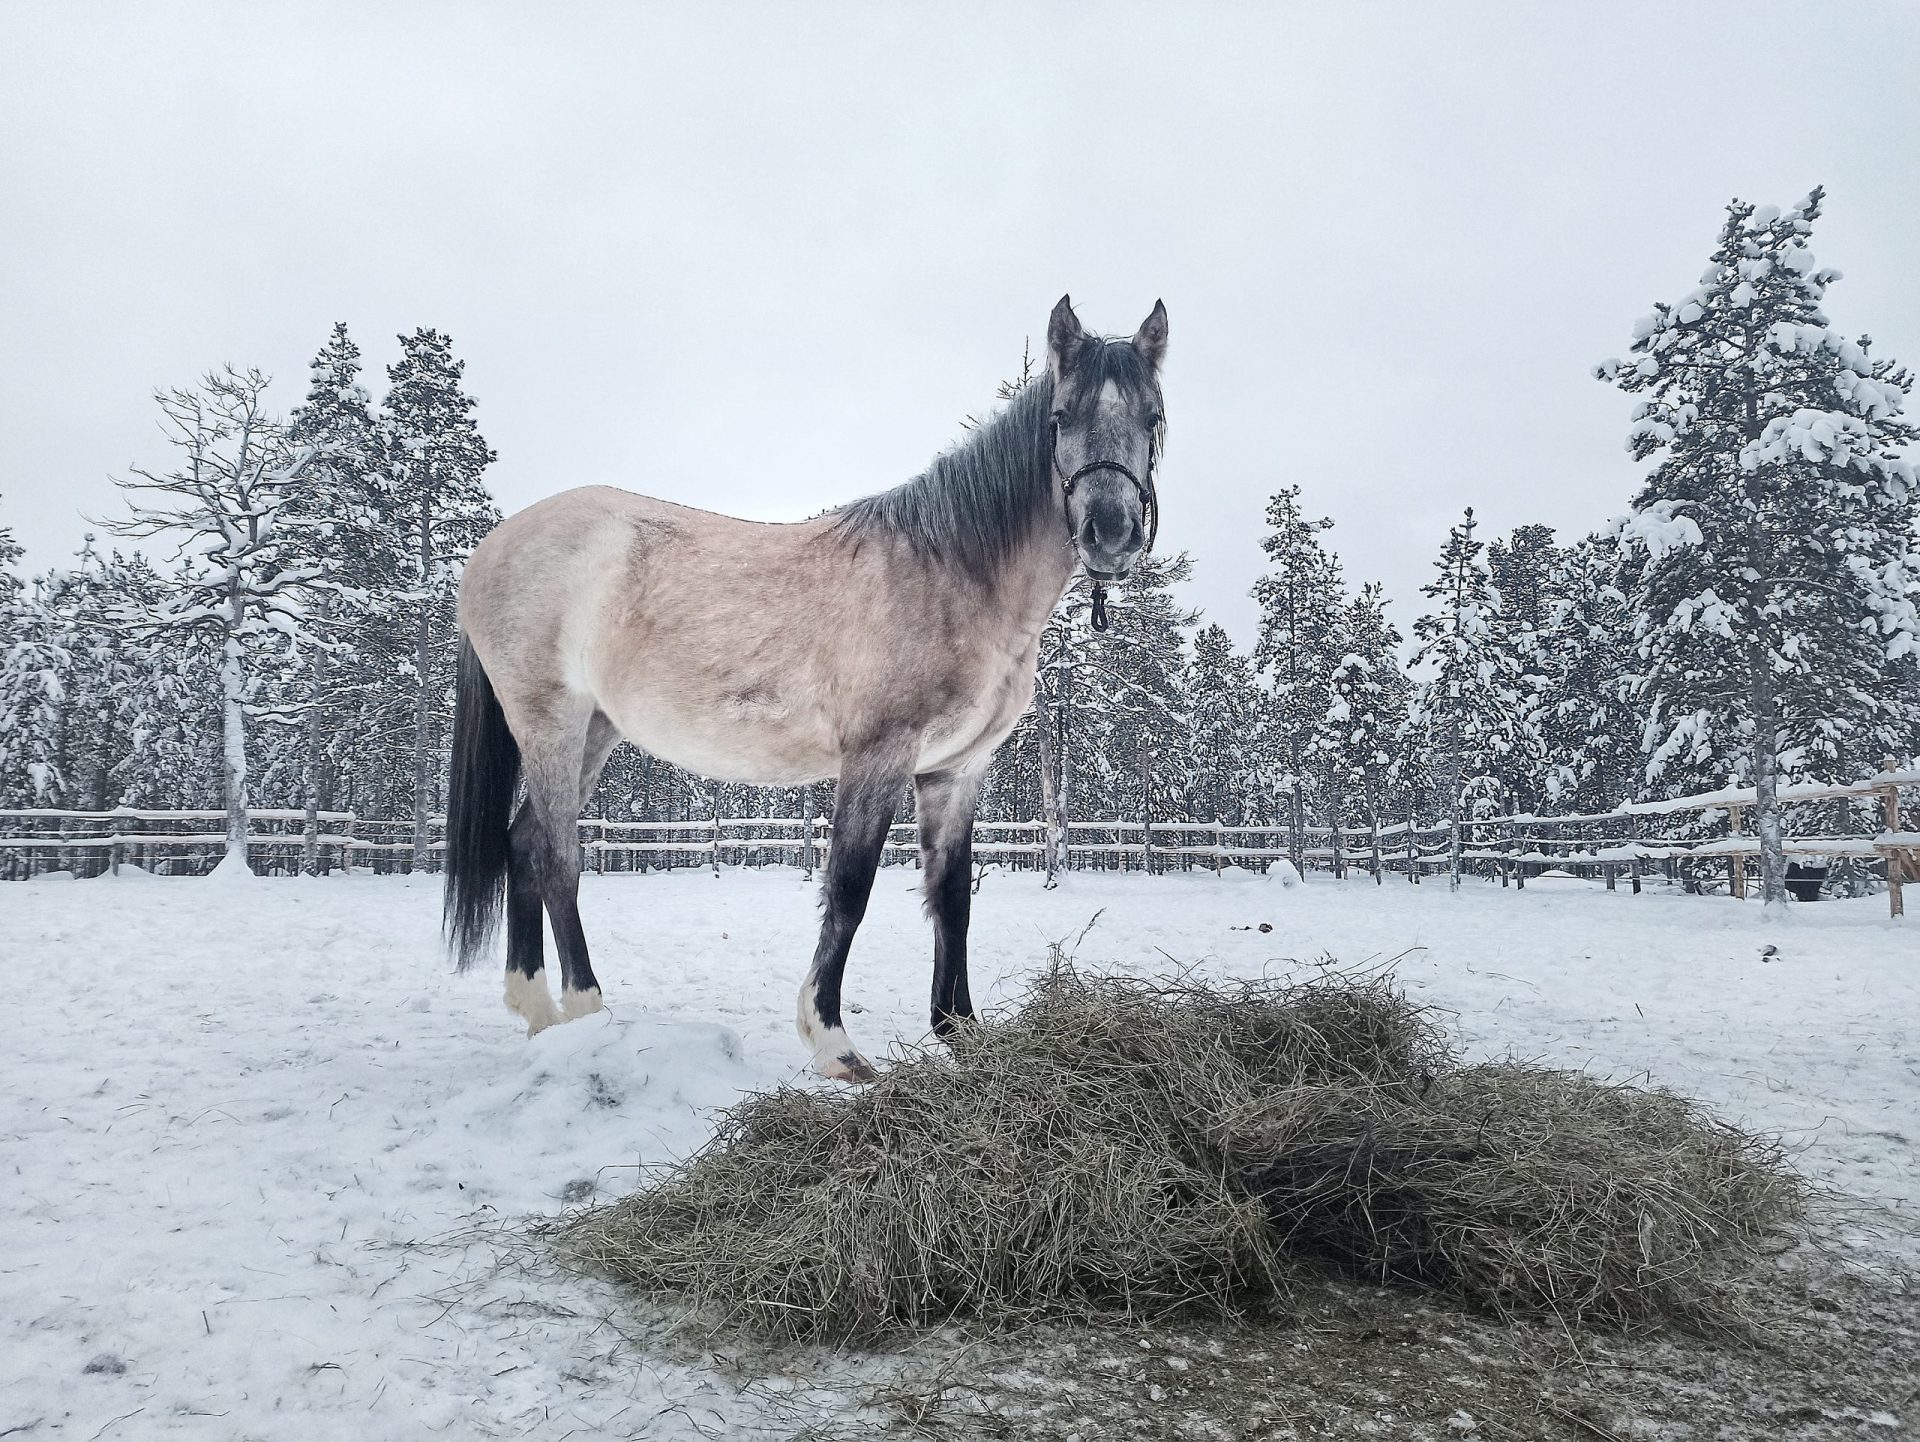 SRPMIC Wild Horse Takes a Journey to Finland